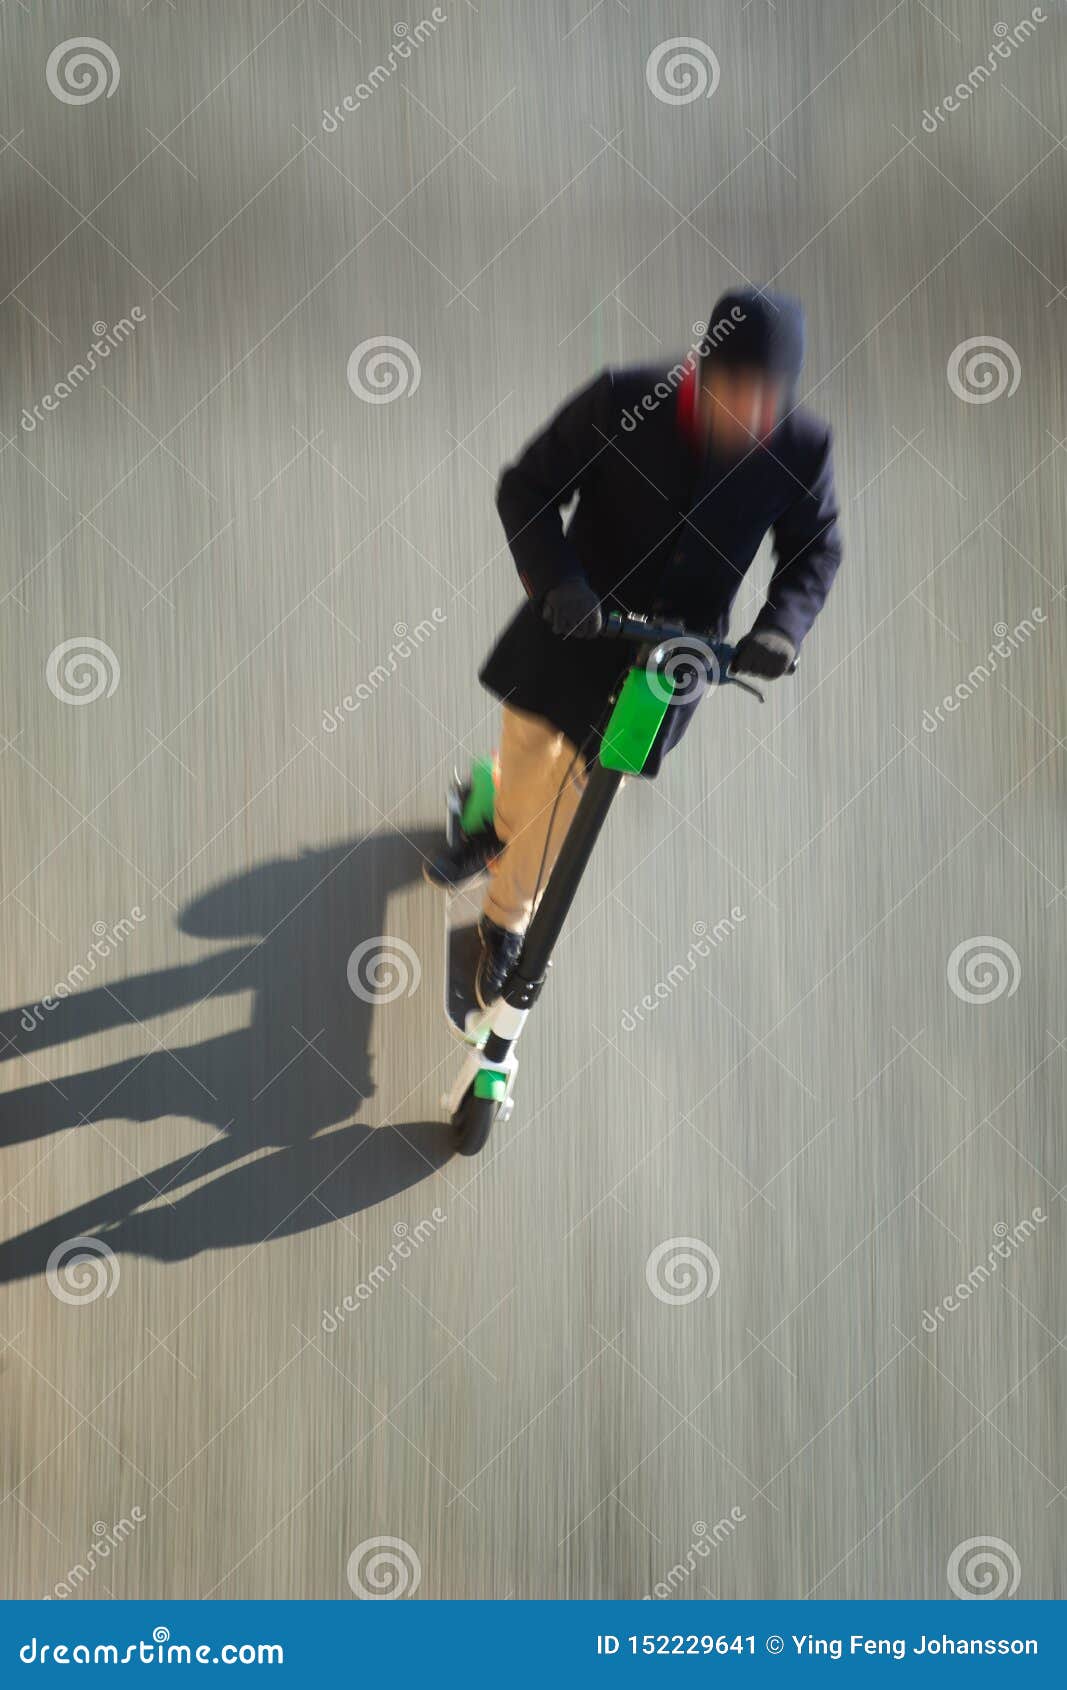 Man on kick scooter stock image. Image of scooter, motion - 152229641